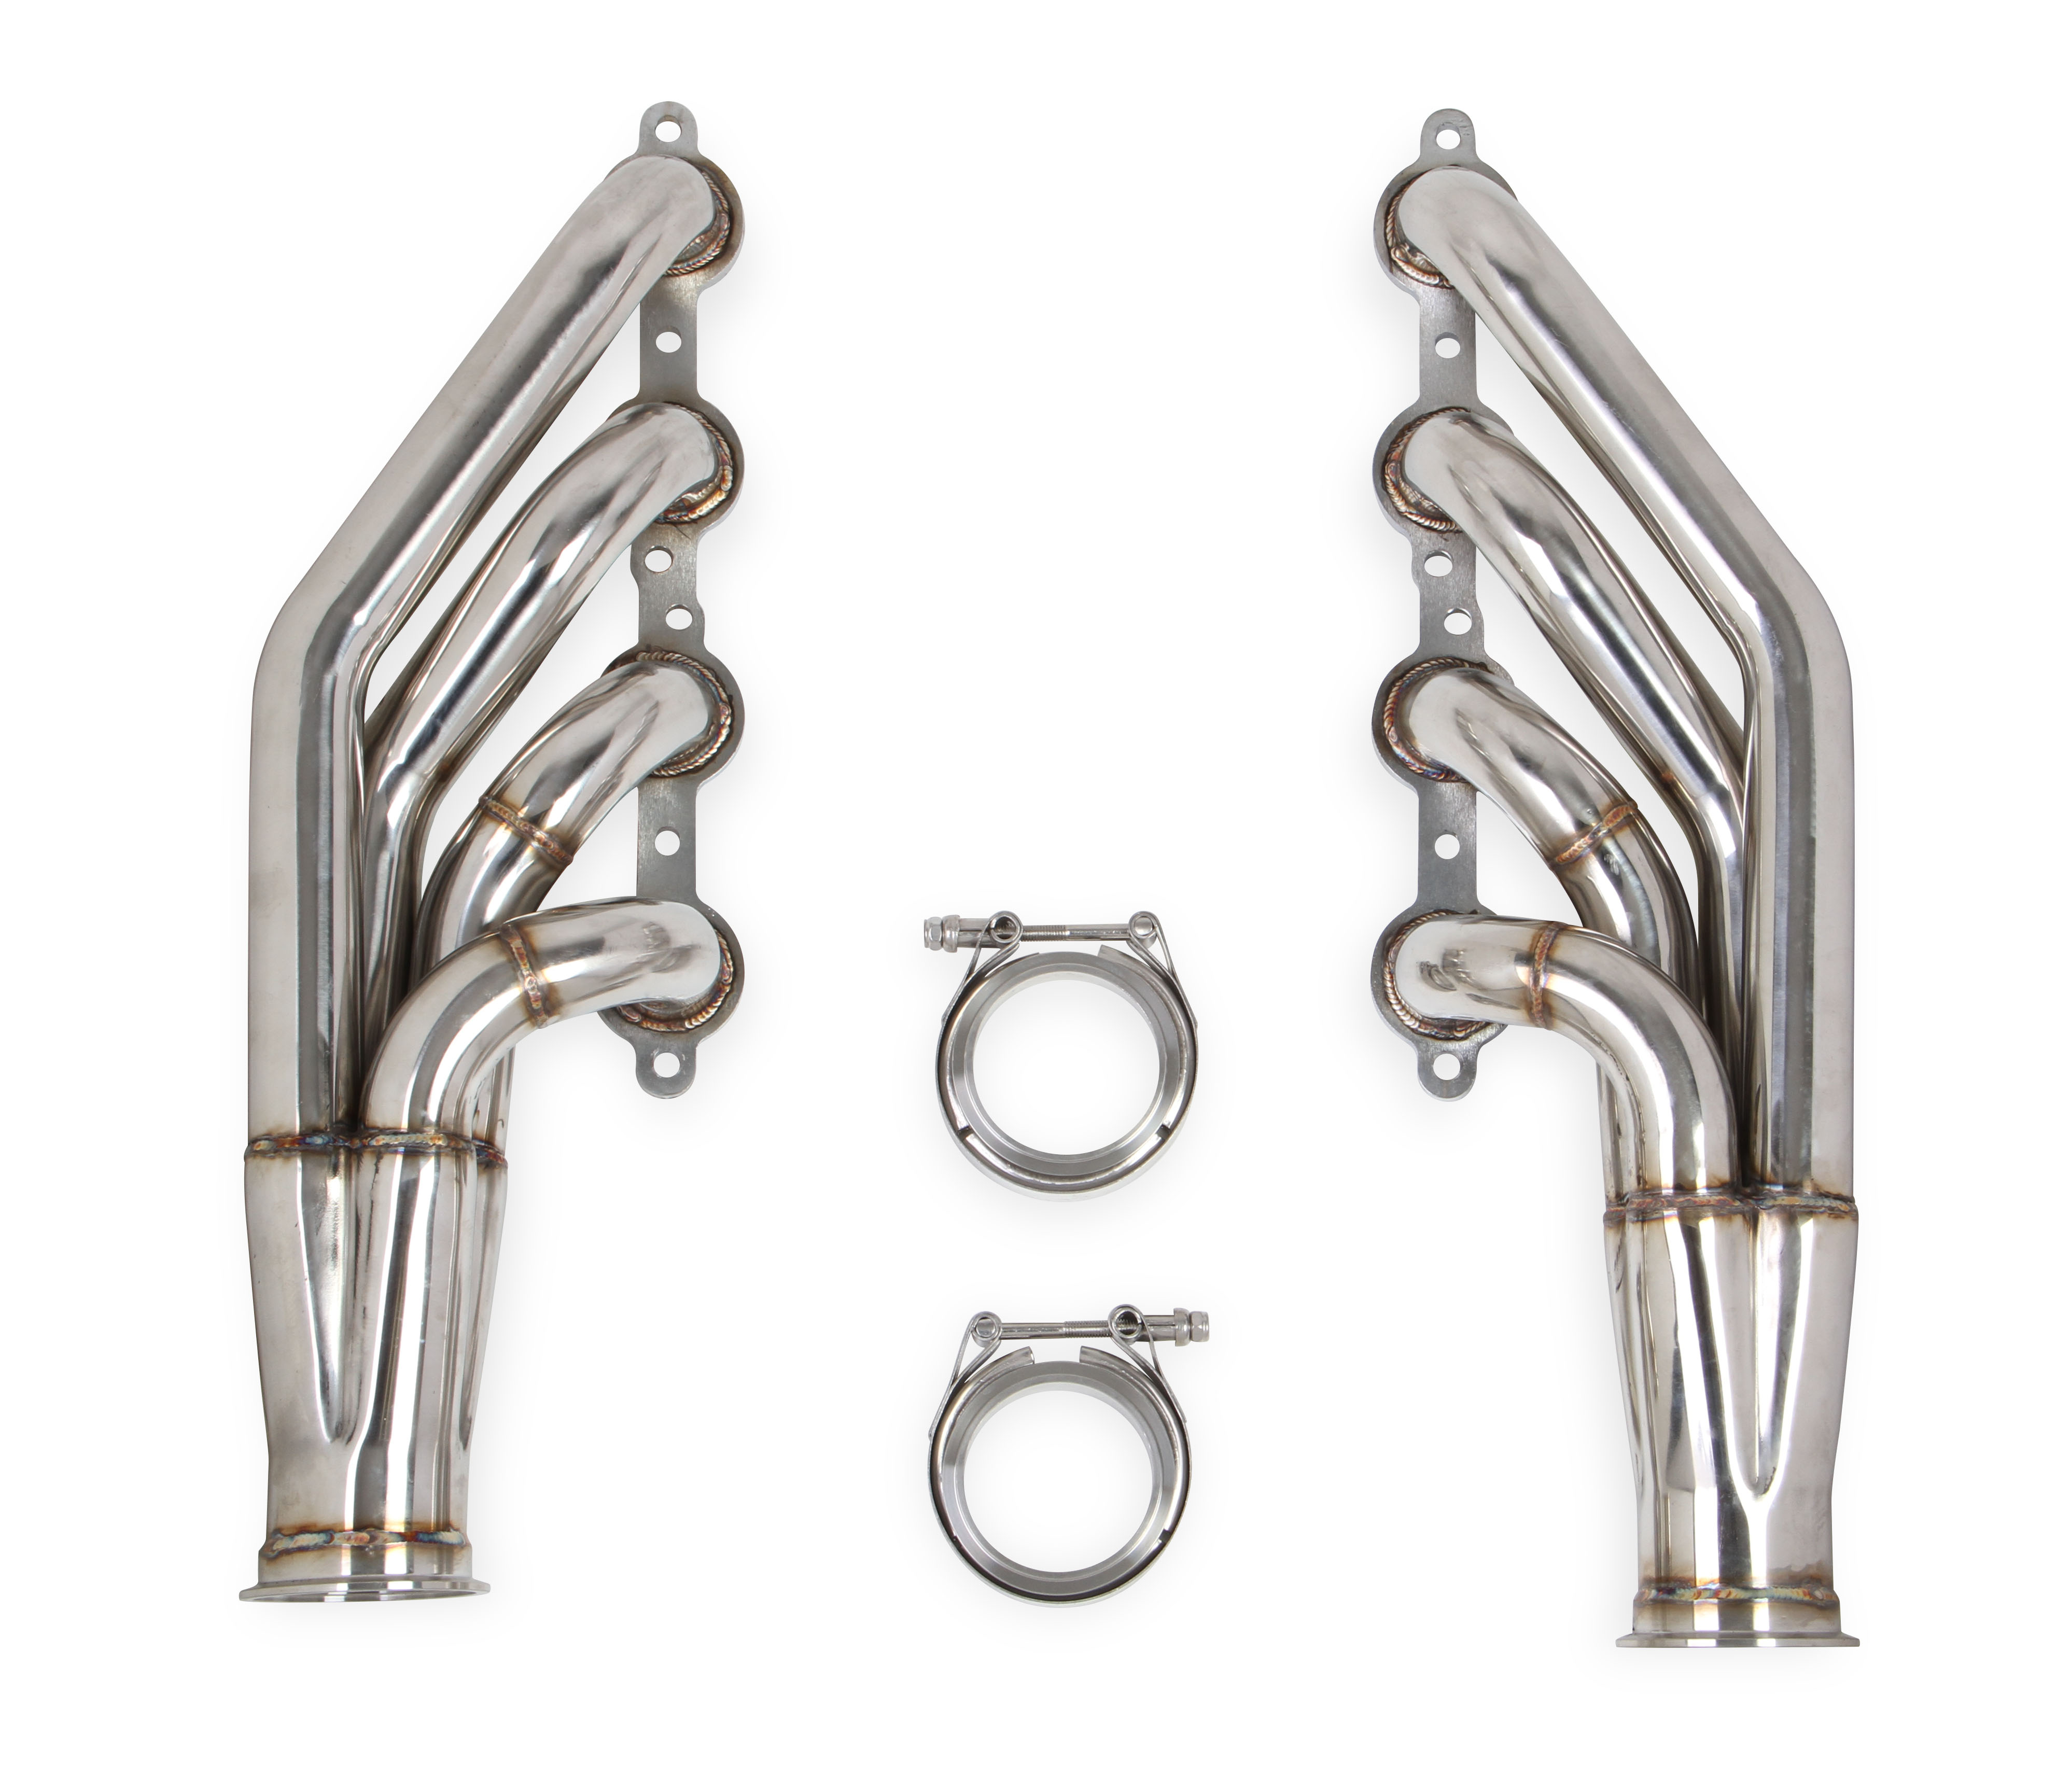 Flowtech LS 4.8L/5.3L/6.0L V8 1 7/8" 409 Stainless Turbo Headers - Ceramic Coated